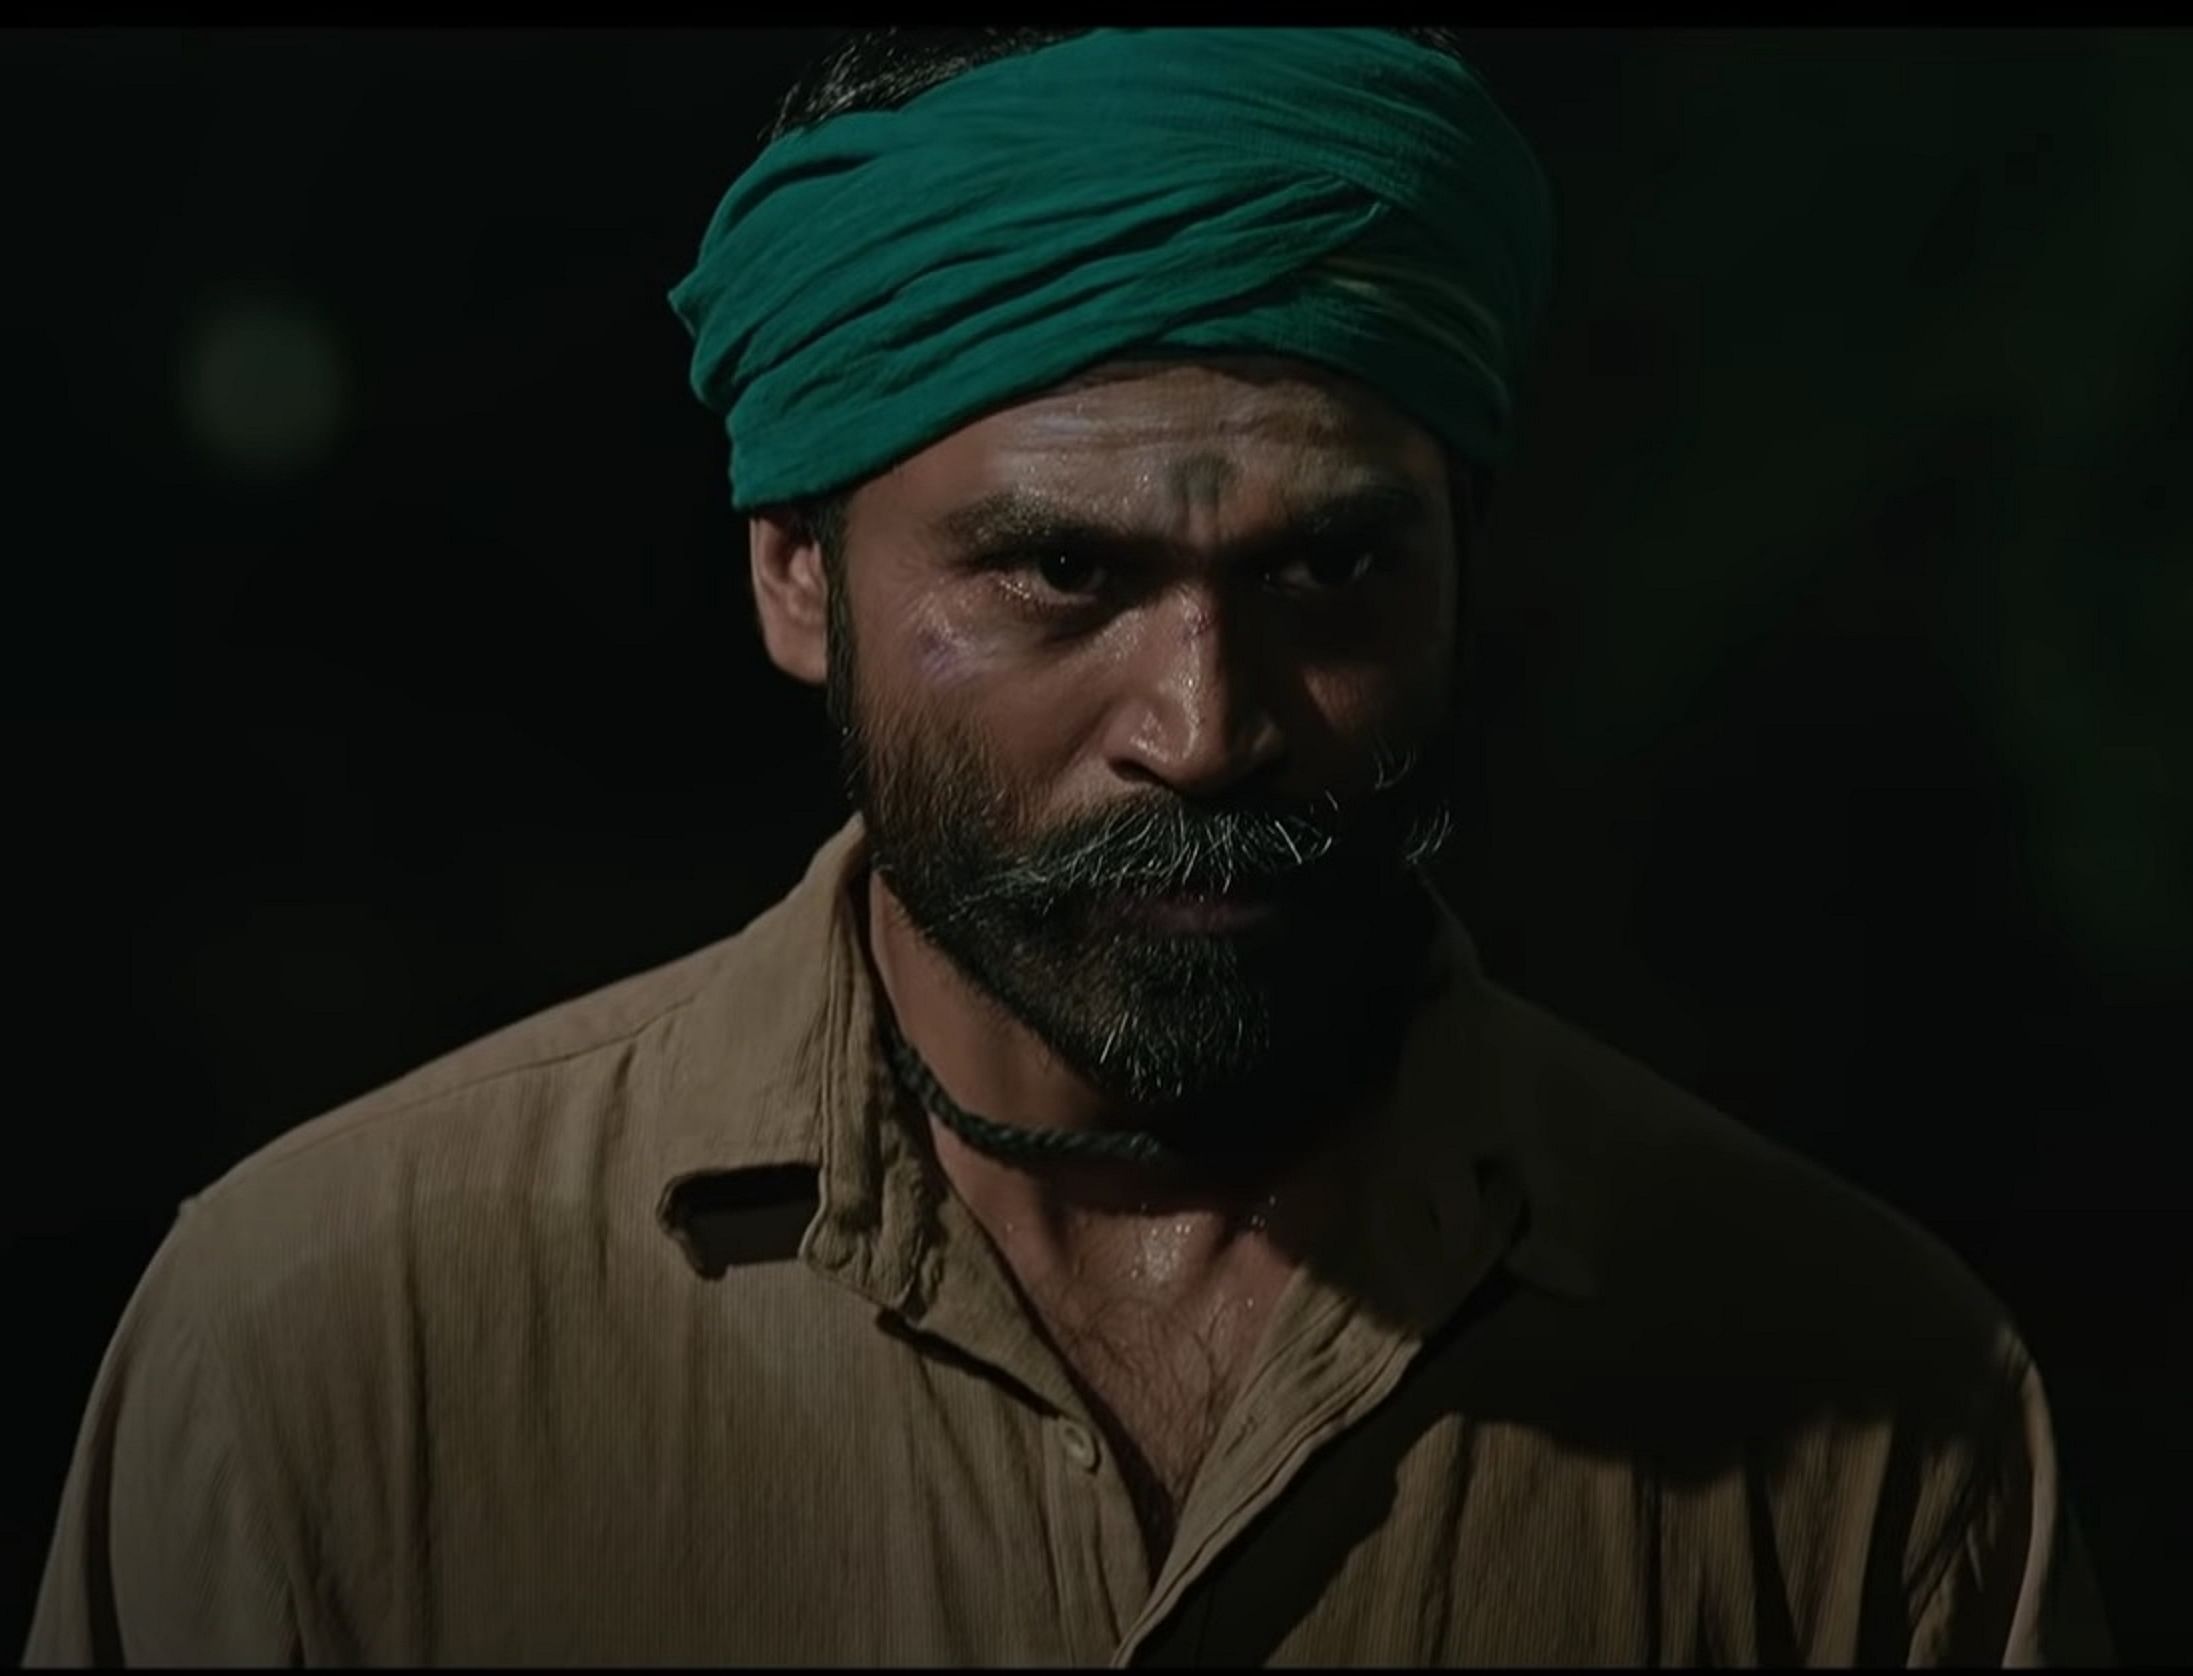 Dhanush bagged his second National Award for his role in 'Asuran'. 